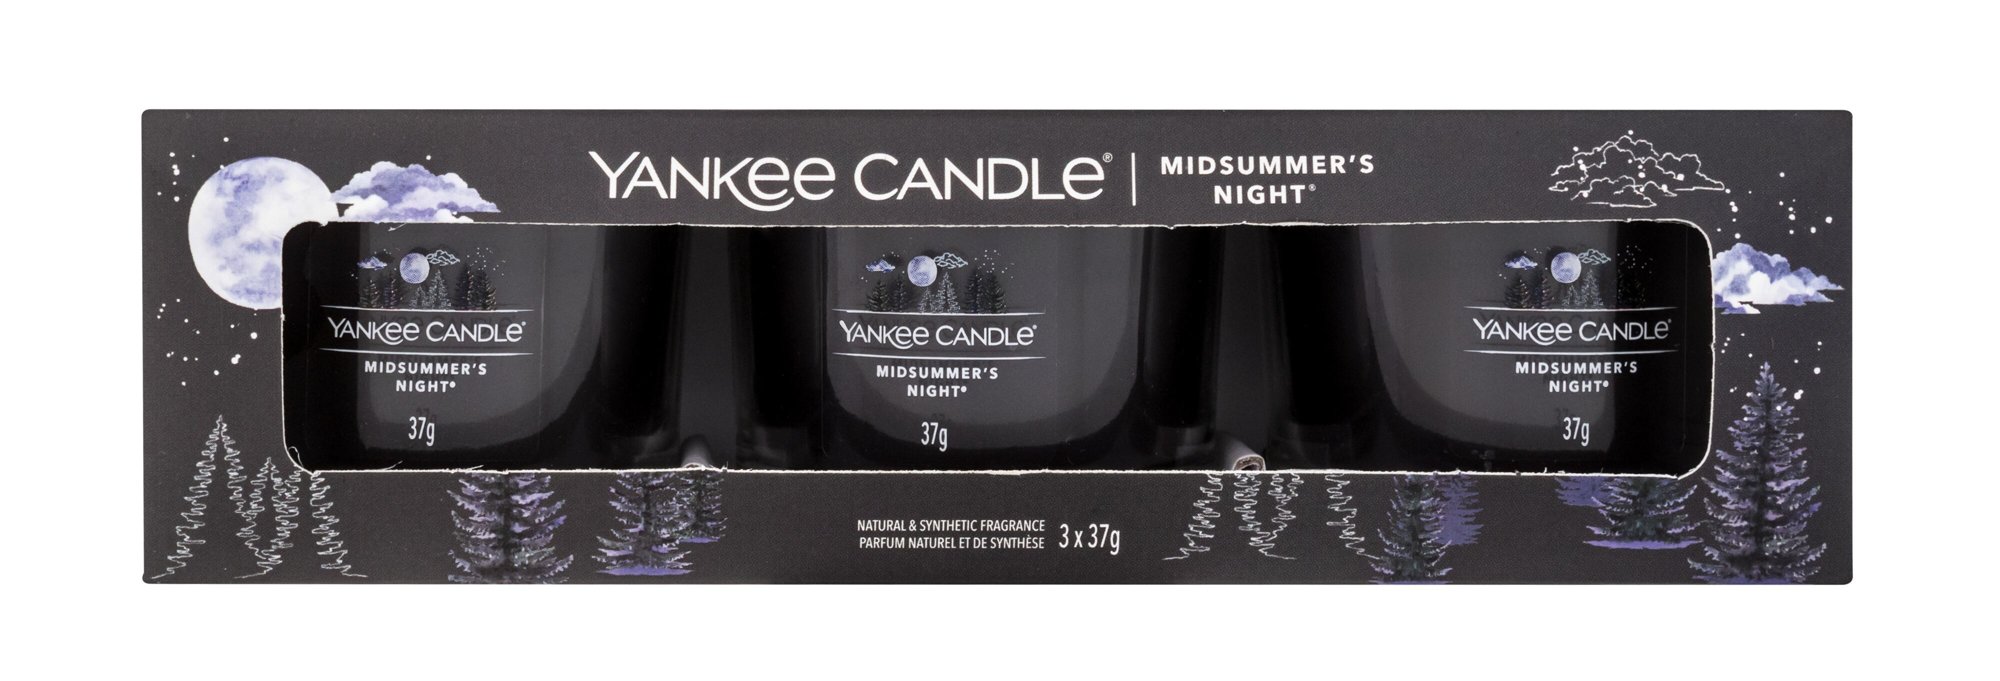 Yankee Candle Midsummer´s Night 37g Scented Candle 3 x 37 g Kvepalai Unisex Scented Candle Rinkinys